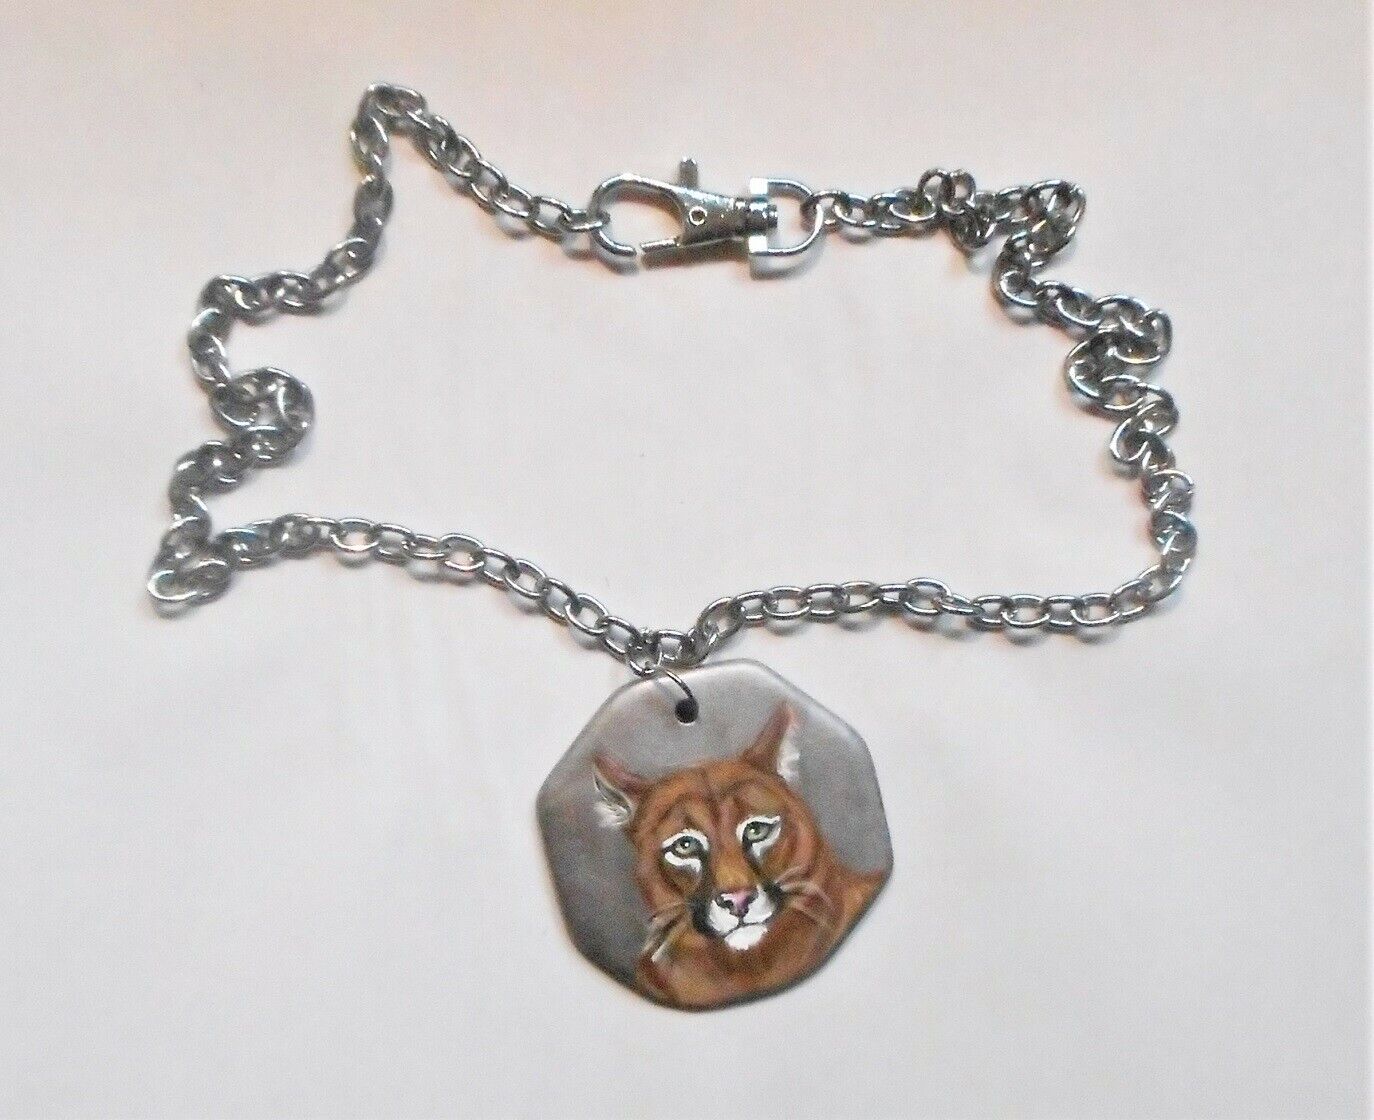 Puma Panther Jewelry Chain Necklace Hand Painted Ceramic Pendant